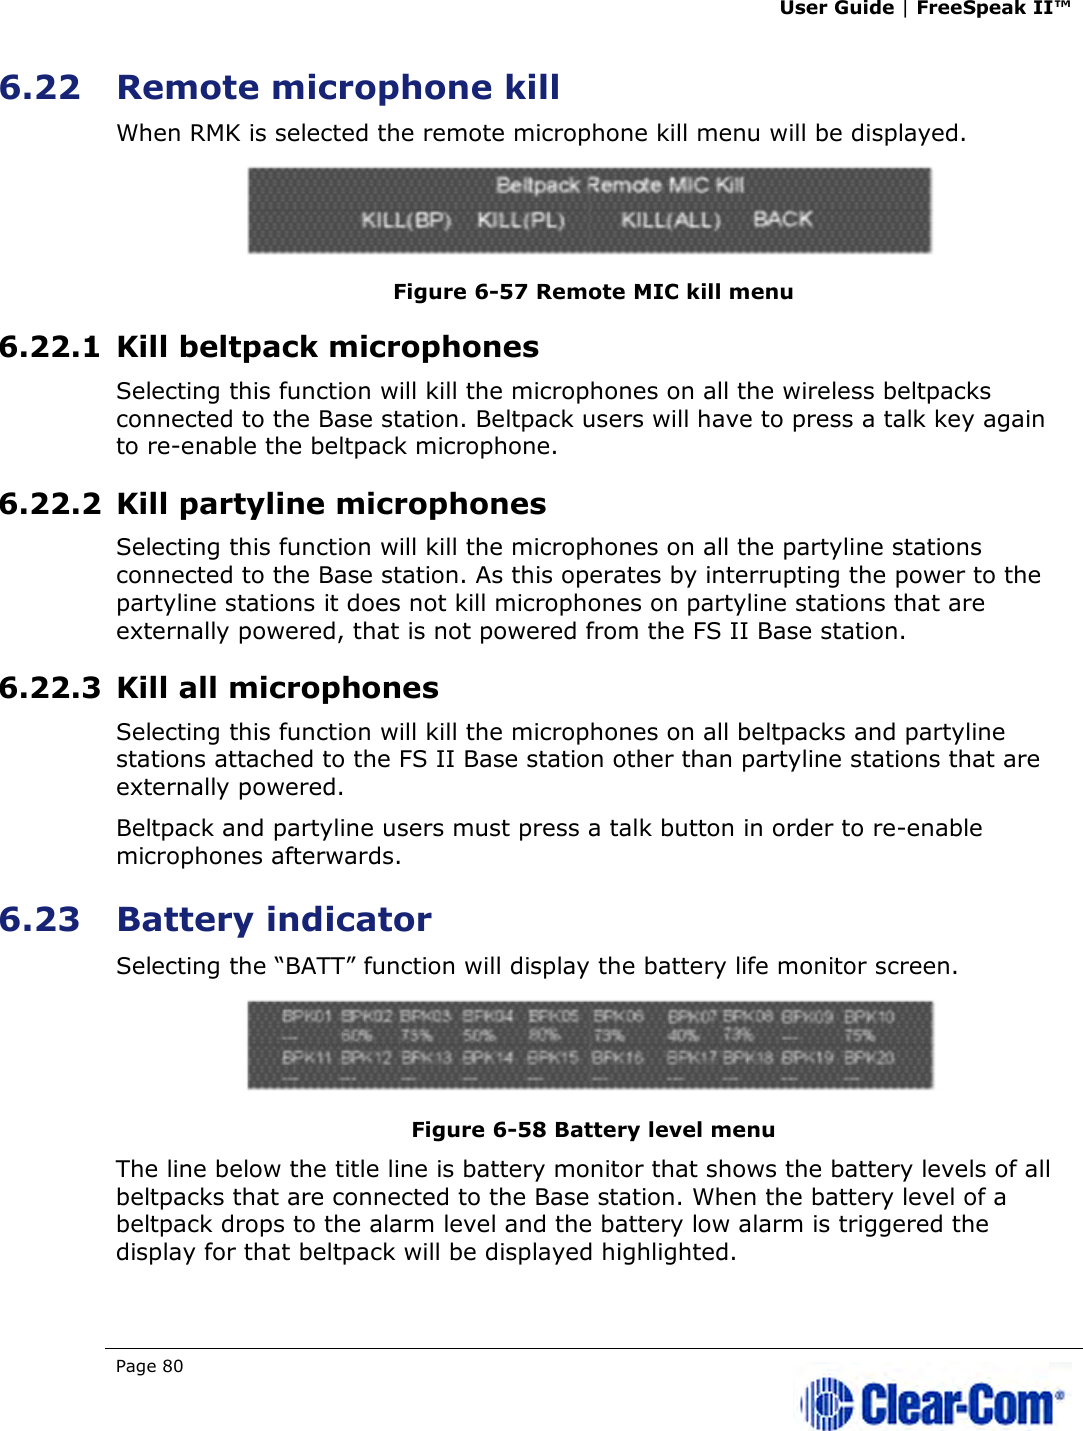 User Guide | FreeSpeak II™  Page 80   6.22 Remote microphone kill When RMK is selected the remote microphone kill menu will be displayed.  Figure 6-57 Remote MIC kill menu 6.22.1 Kill beltpack microphones Selecting this function will kill the microphones on all the wireless beltpacks connected to the Base station. Beltpack users will have to press a talk key again to re-enable the beltpack microphone. 6.22.2 Kill partyline microphones Selecting this function will kill the microphones on all the partyline stations connected to the Base station. As this operates by interrupting the power to the partyline stations it does not kill microphones on partyline stations that are externally powered, that is not powered from the FS II Base station. 6.22.3 Kill all microphones Selecting this function will kill the microphones on all beltpacks and partyline stations attached to the FS II Base station other than partyline stations that are externally powered. Beltpack and partyline users must press a talk button in order to re-enable microphones afterwards. 6.23 Battery indicator Selecting the “BATT” function will display the battery life monitor screen.  Figure 6-58 Battery level menu The line below the title line is battery monitor that shows the battery levels of all beltpacks that are connected to the Base station. When the battery level of a beltpack drops to the alarm level and the battery low alarm is triggered the display for that beltpack will be displayed highlighted.  